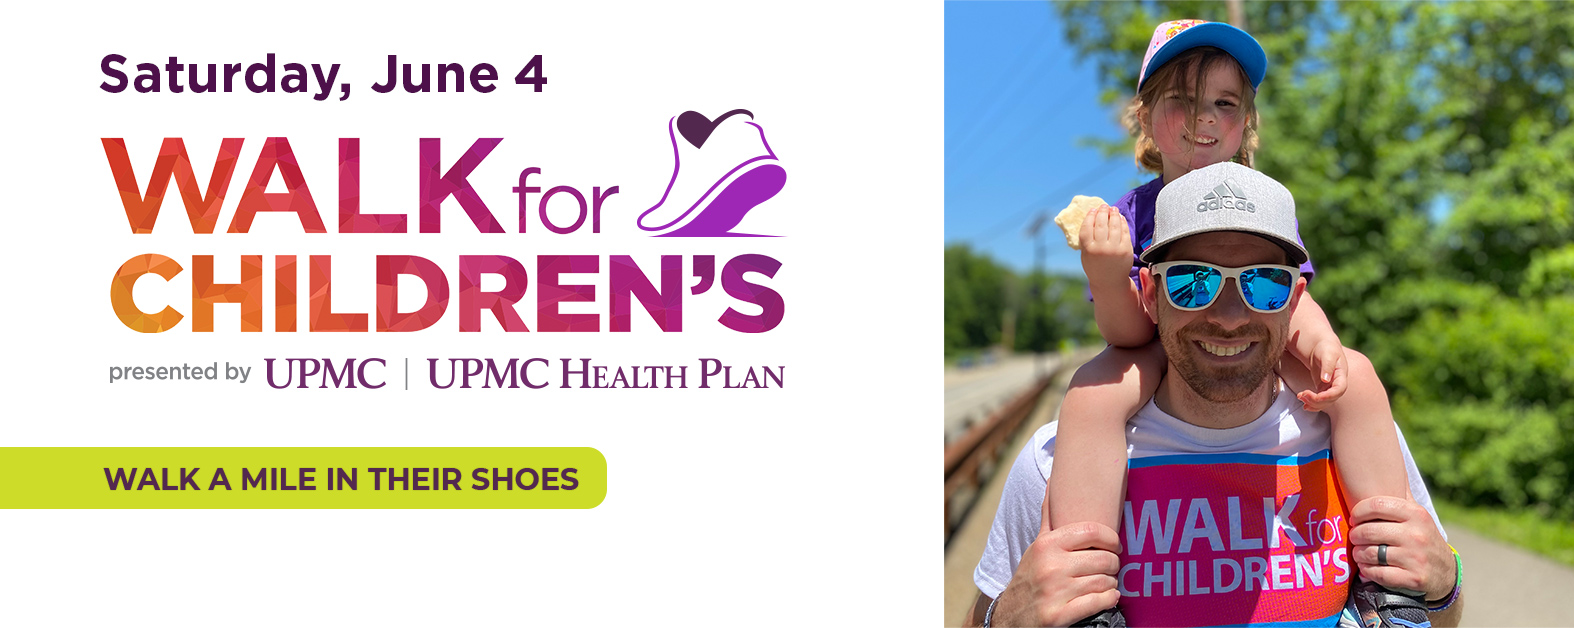 Saturday, June 4 - Walk for Children's presented by UPMC | UPMC Health Plan - Walk a mile in their shoes - photo shows a father with his child on his shoulders at the last Walk